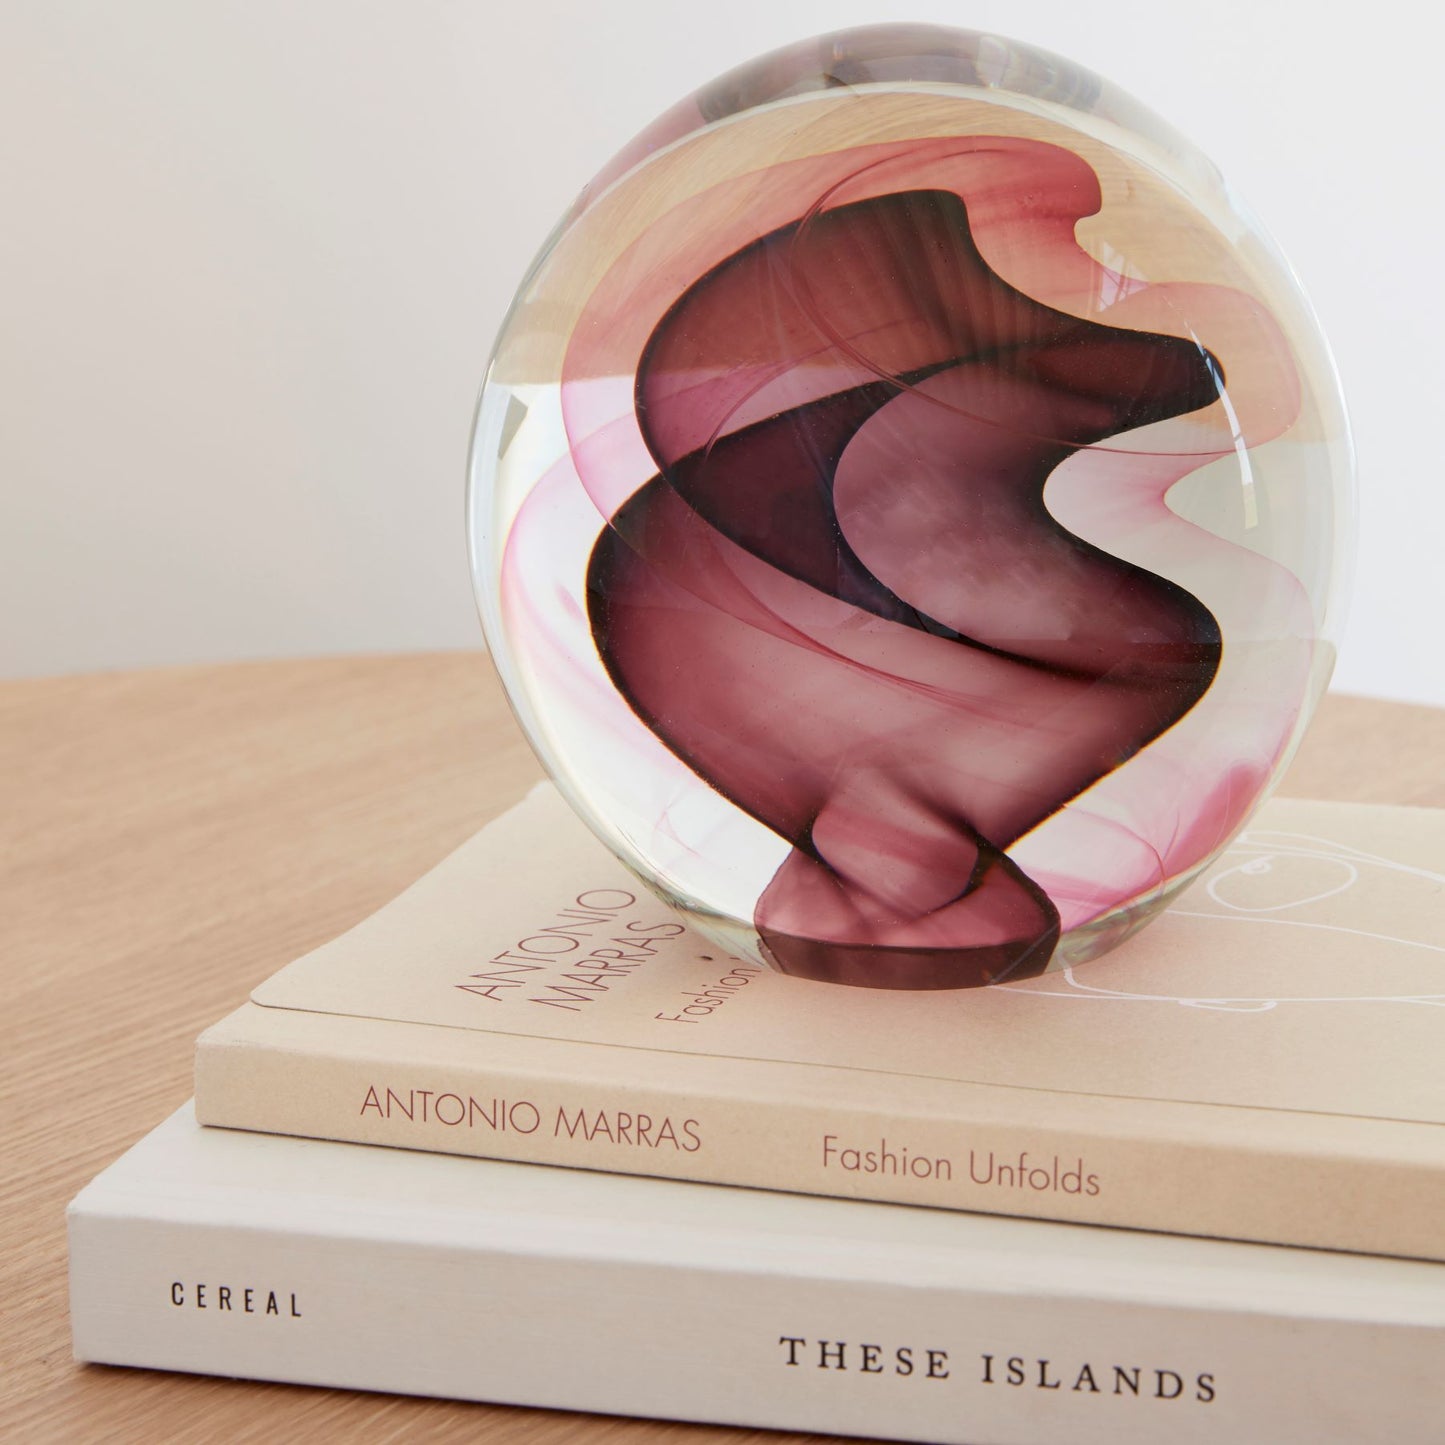 Close up of a Hubsch Interior objet d’art paperweight in burgundy red and pink swirl pattern on coffee table with books